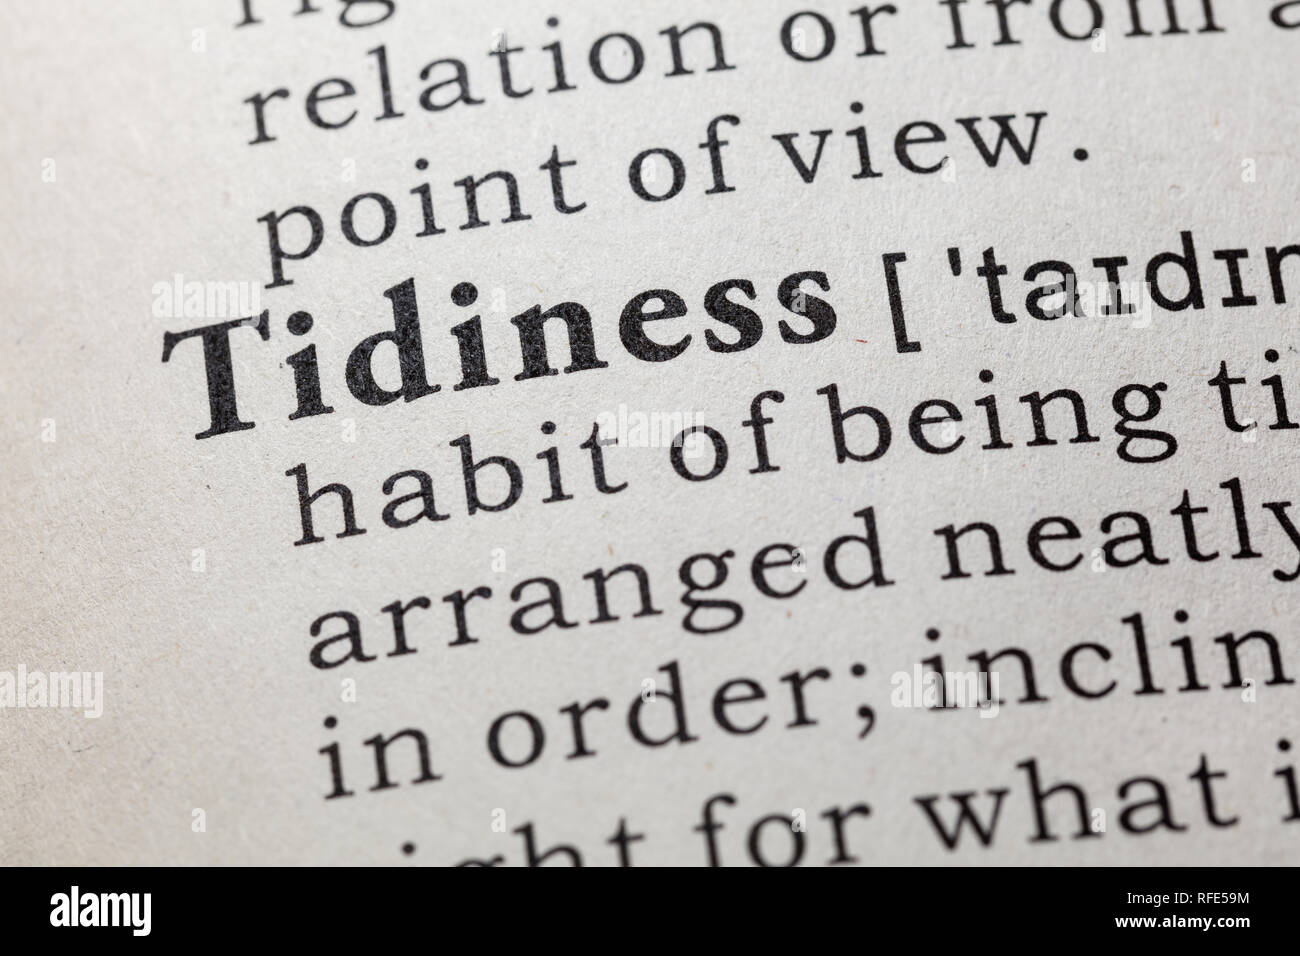 Fake Dictionary, Dictionary definition of the word tidiness. including key descriptive words. Stock Photo